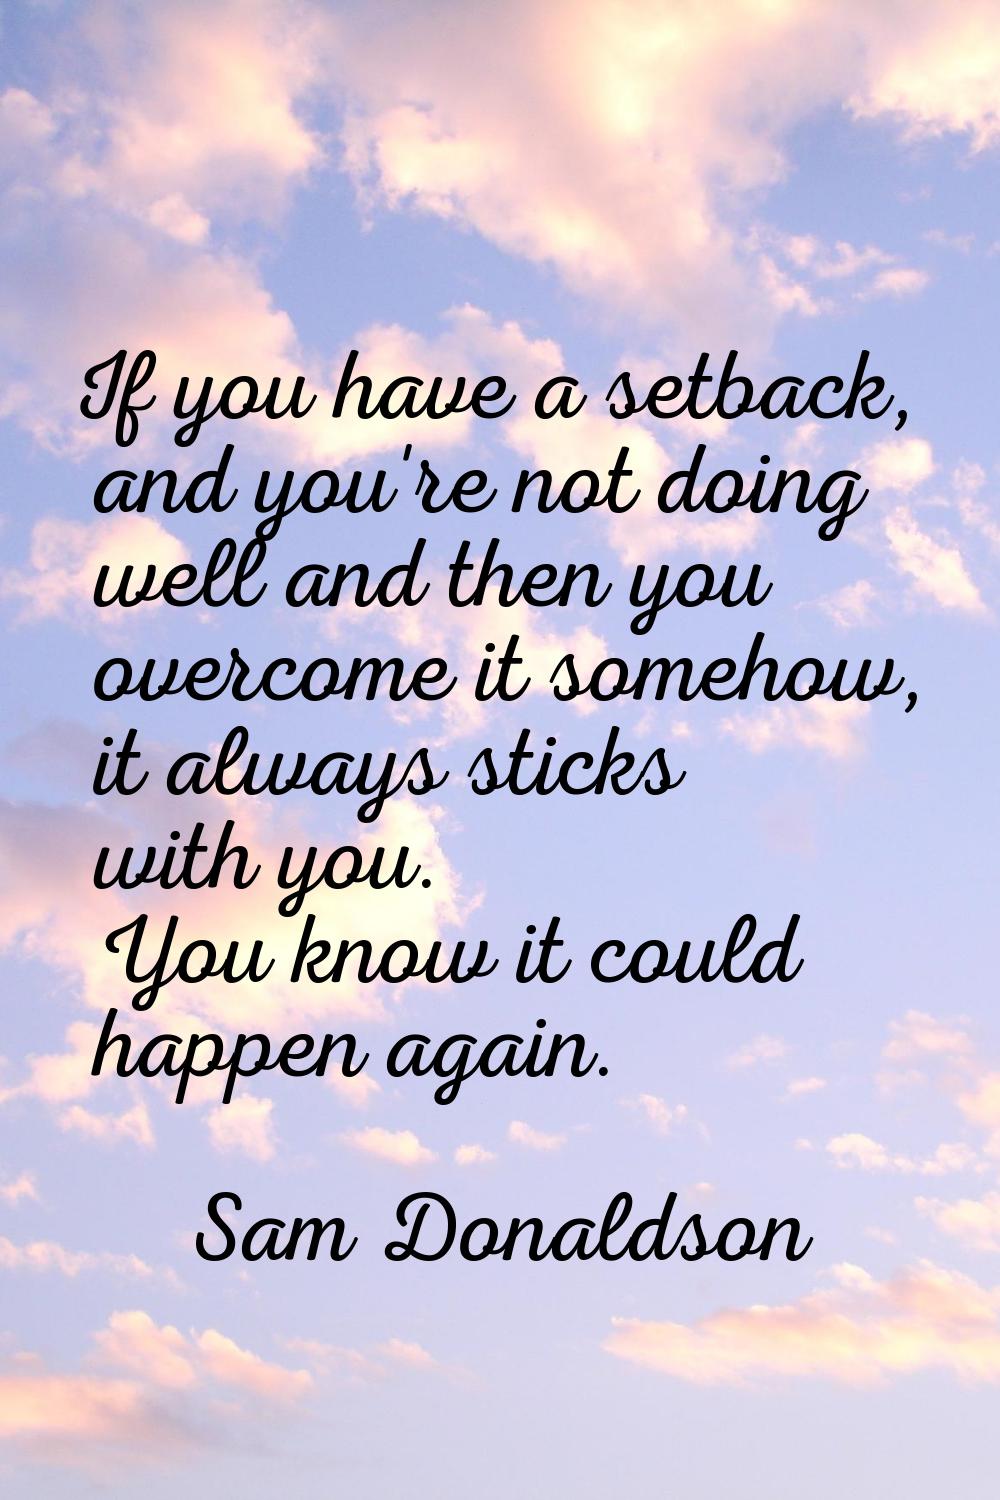 If you have a setback, and you're not doing well and then you overcome it somehow, it always sticks